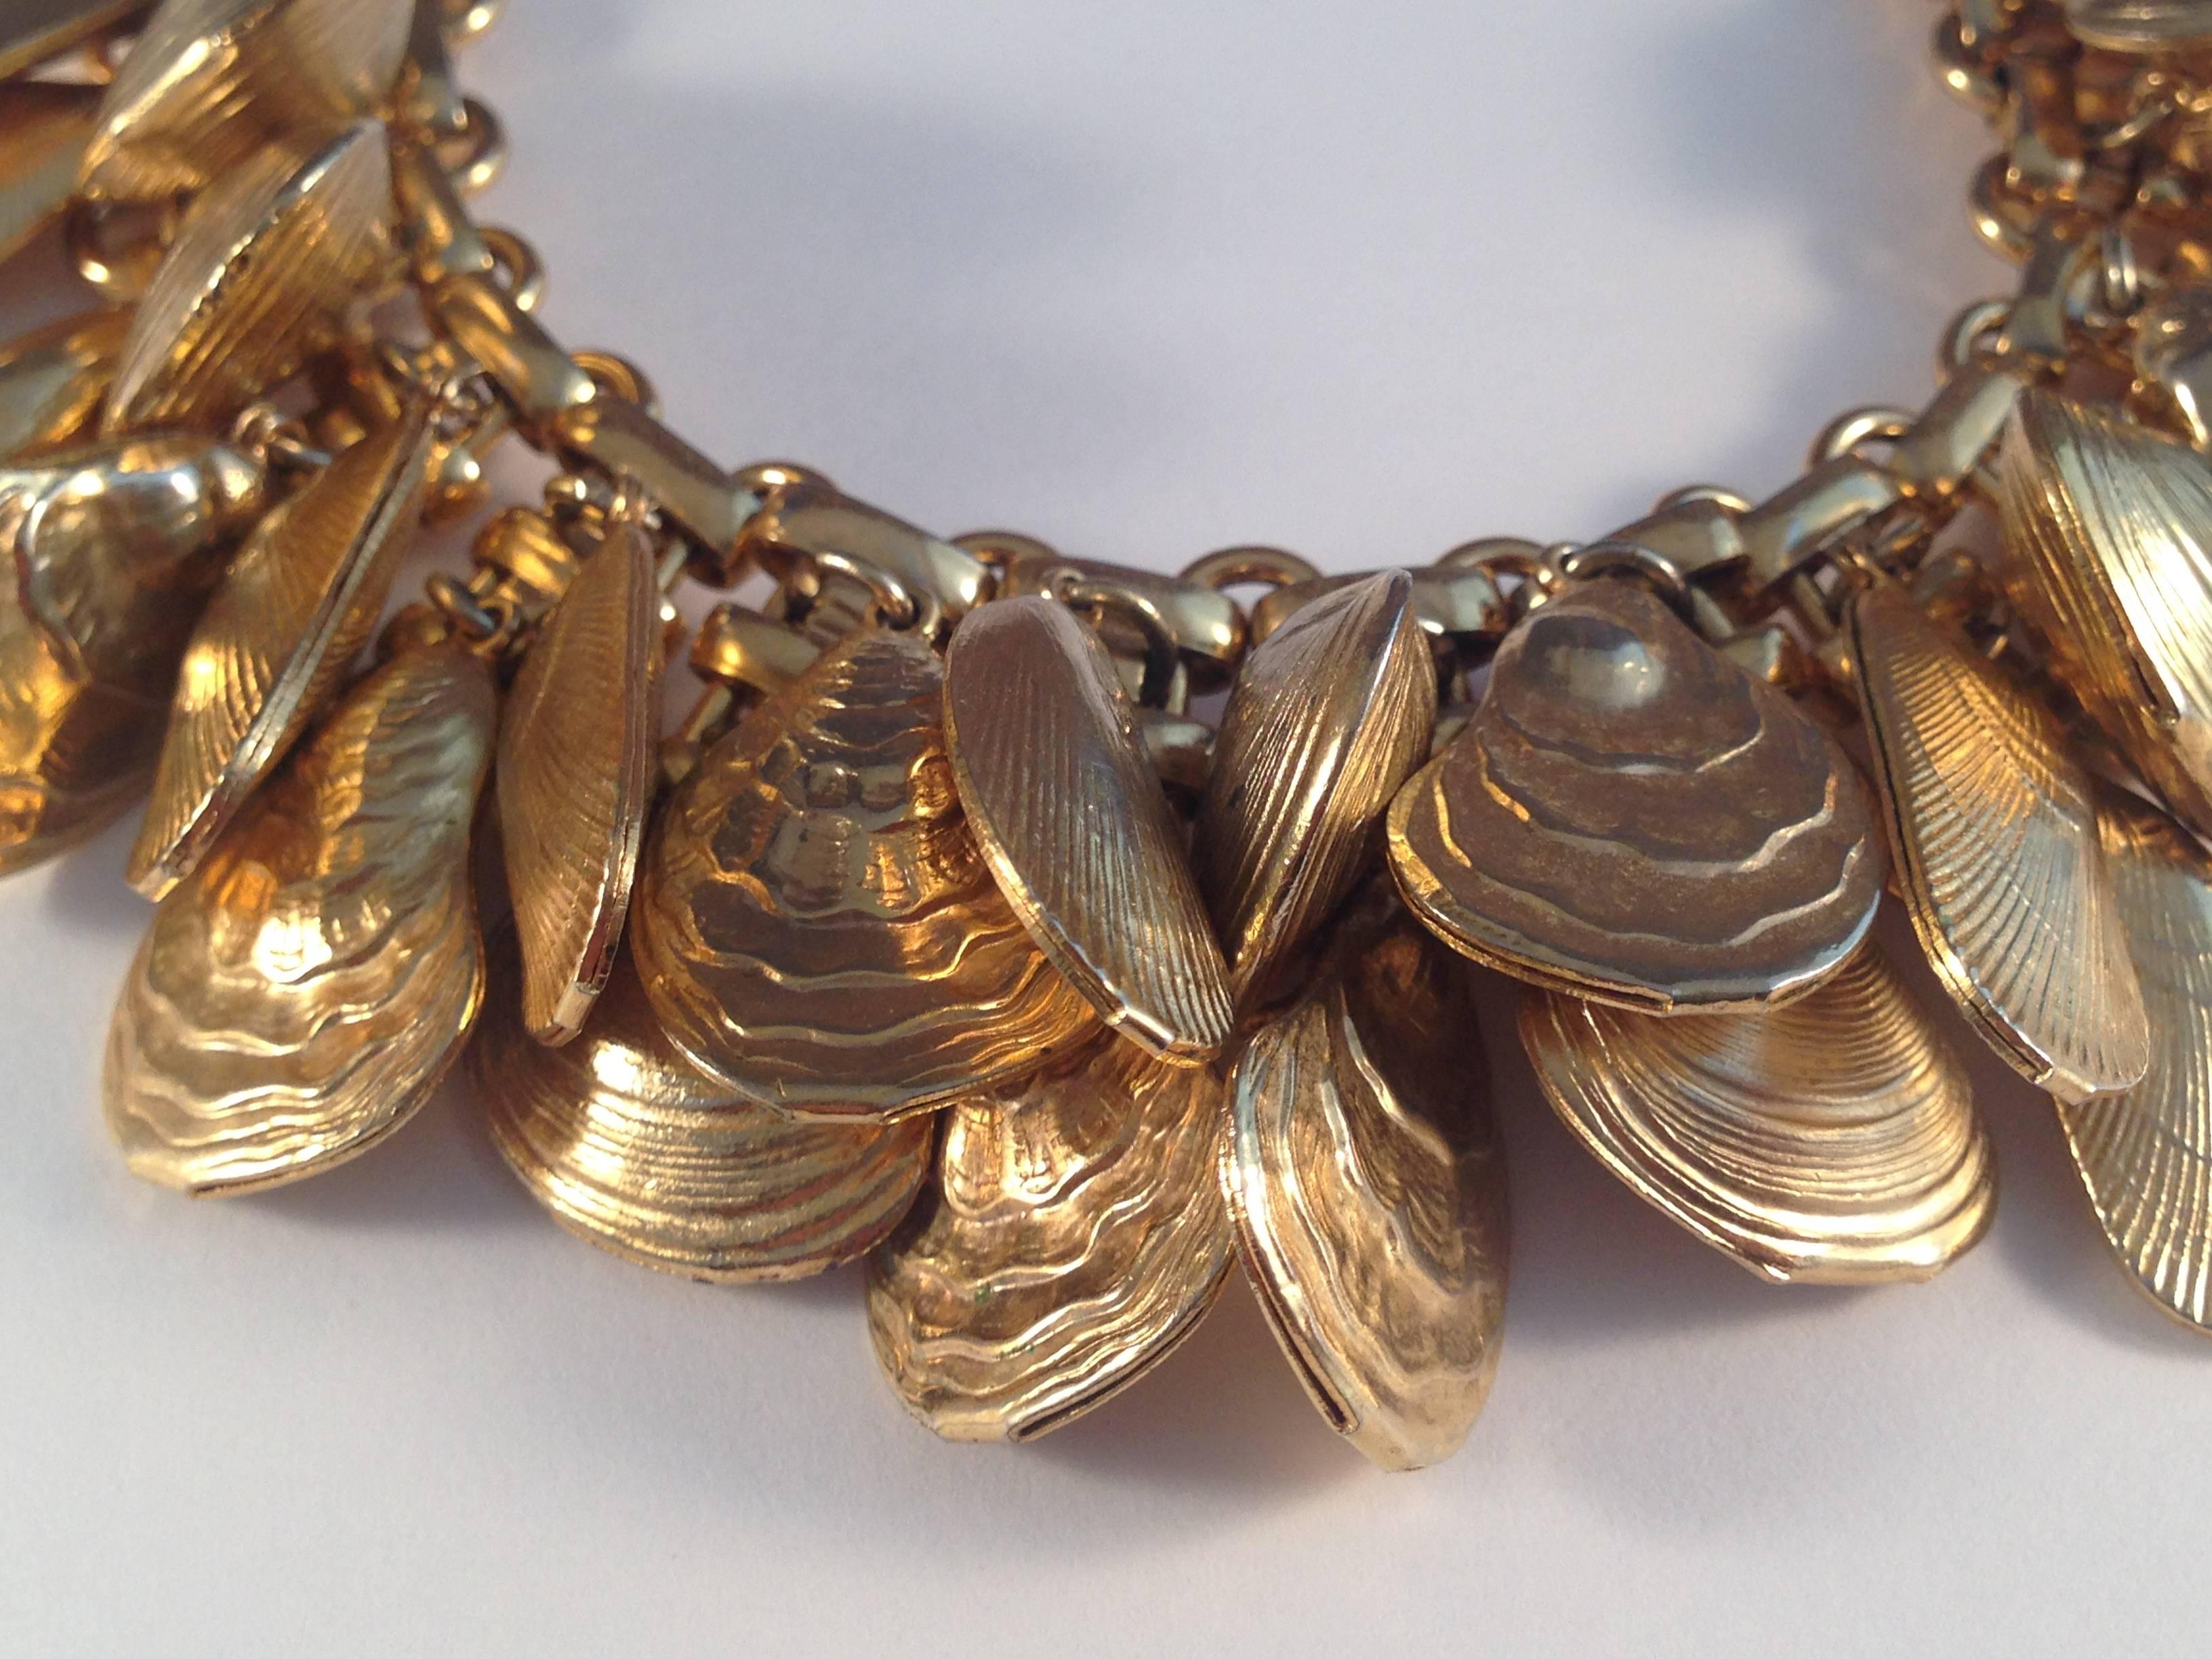 This vintage gold tone Napier bracelet features 30 seashell charms - including clam, oyster and mussel shells. This is a very desirable bracelet among collectors and it is rare to find one with all 30 shells intact. It features a 7 1/2